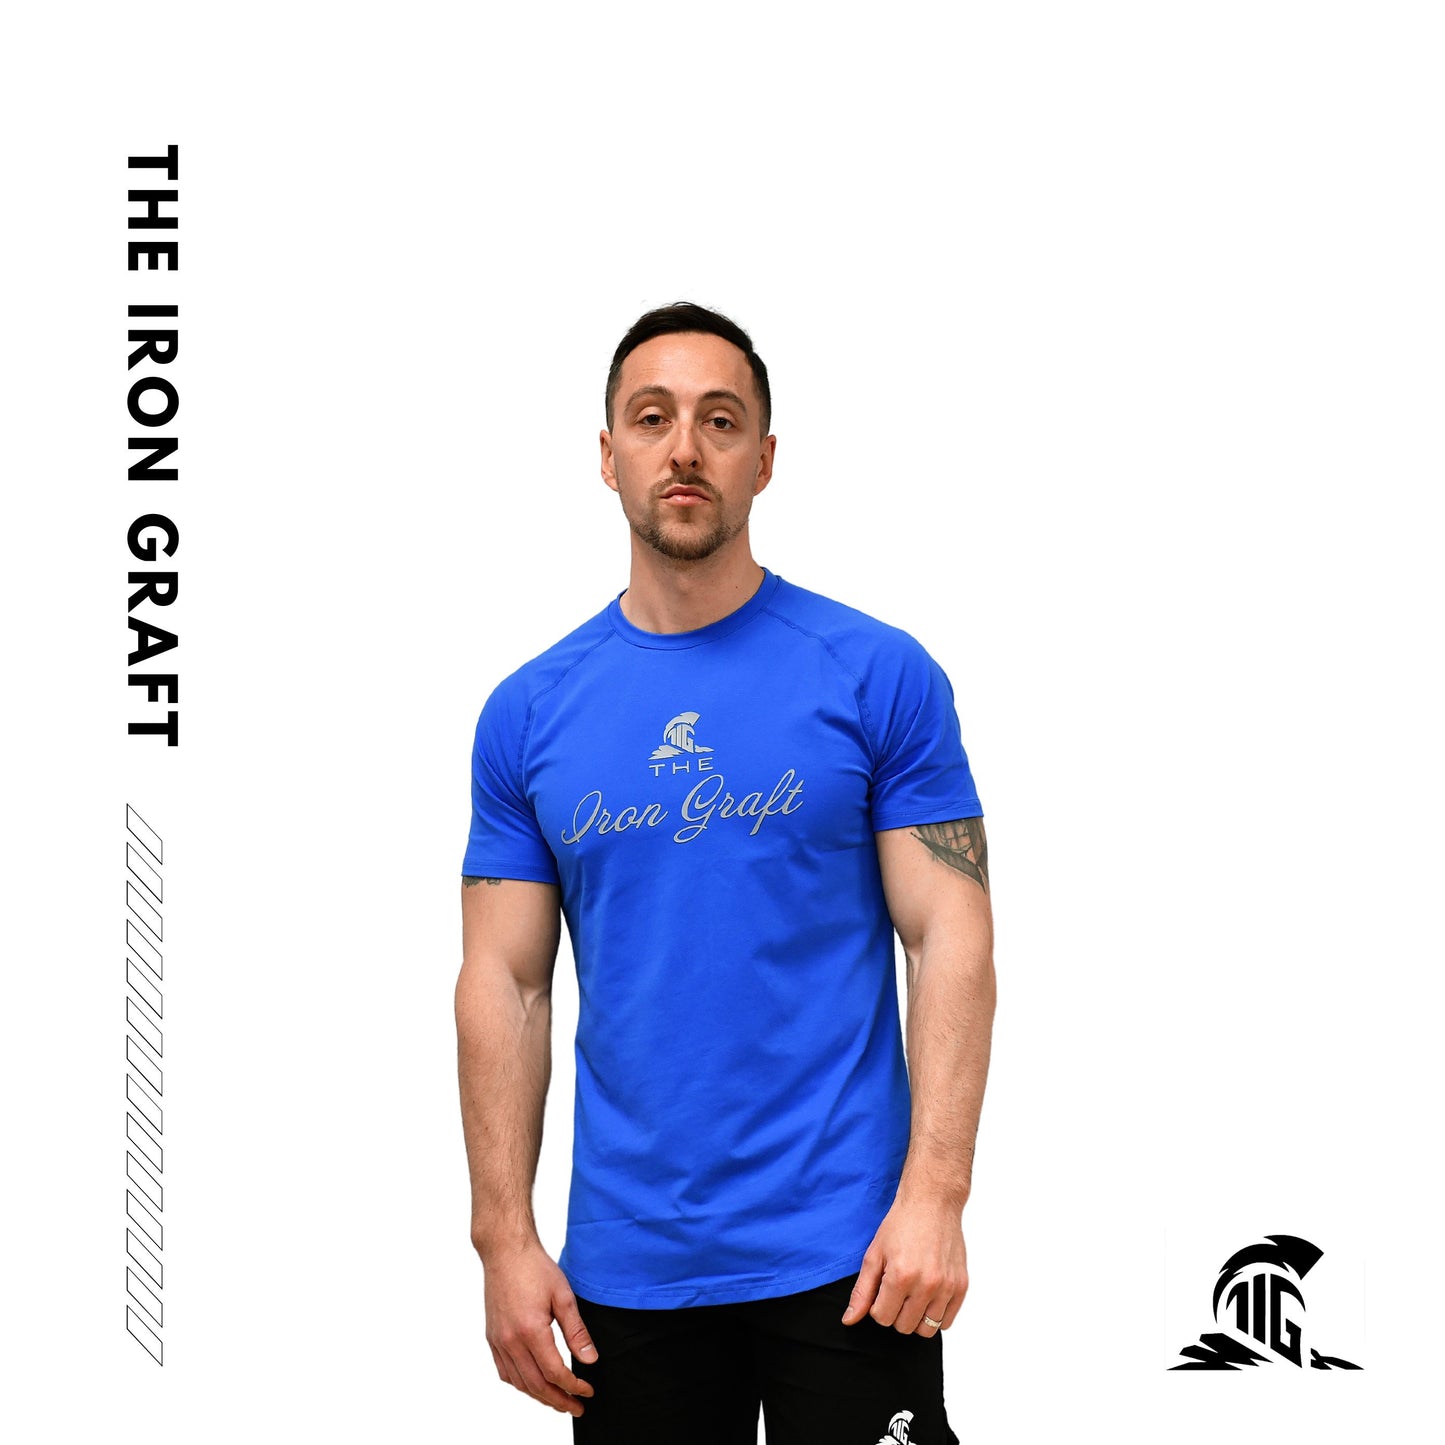 THE IRON GRAFT Muscle Fit T-Shirt - Royal Blue - The Iron Graft